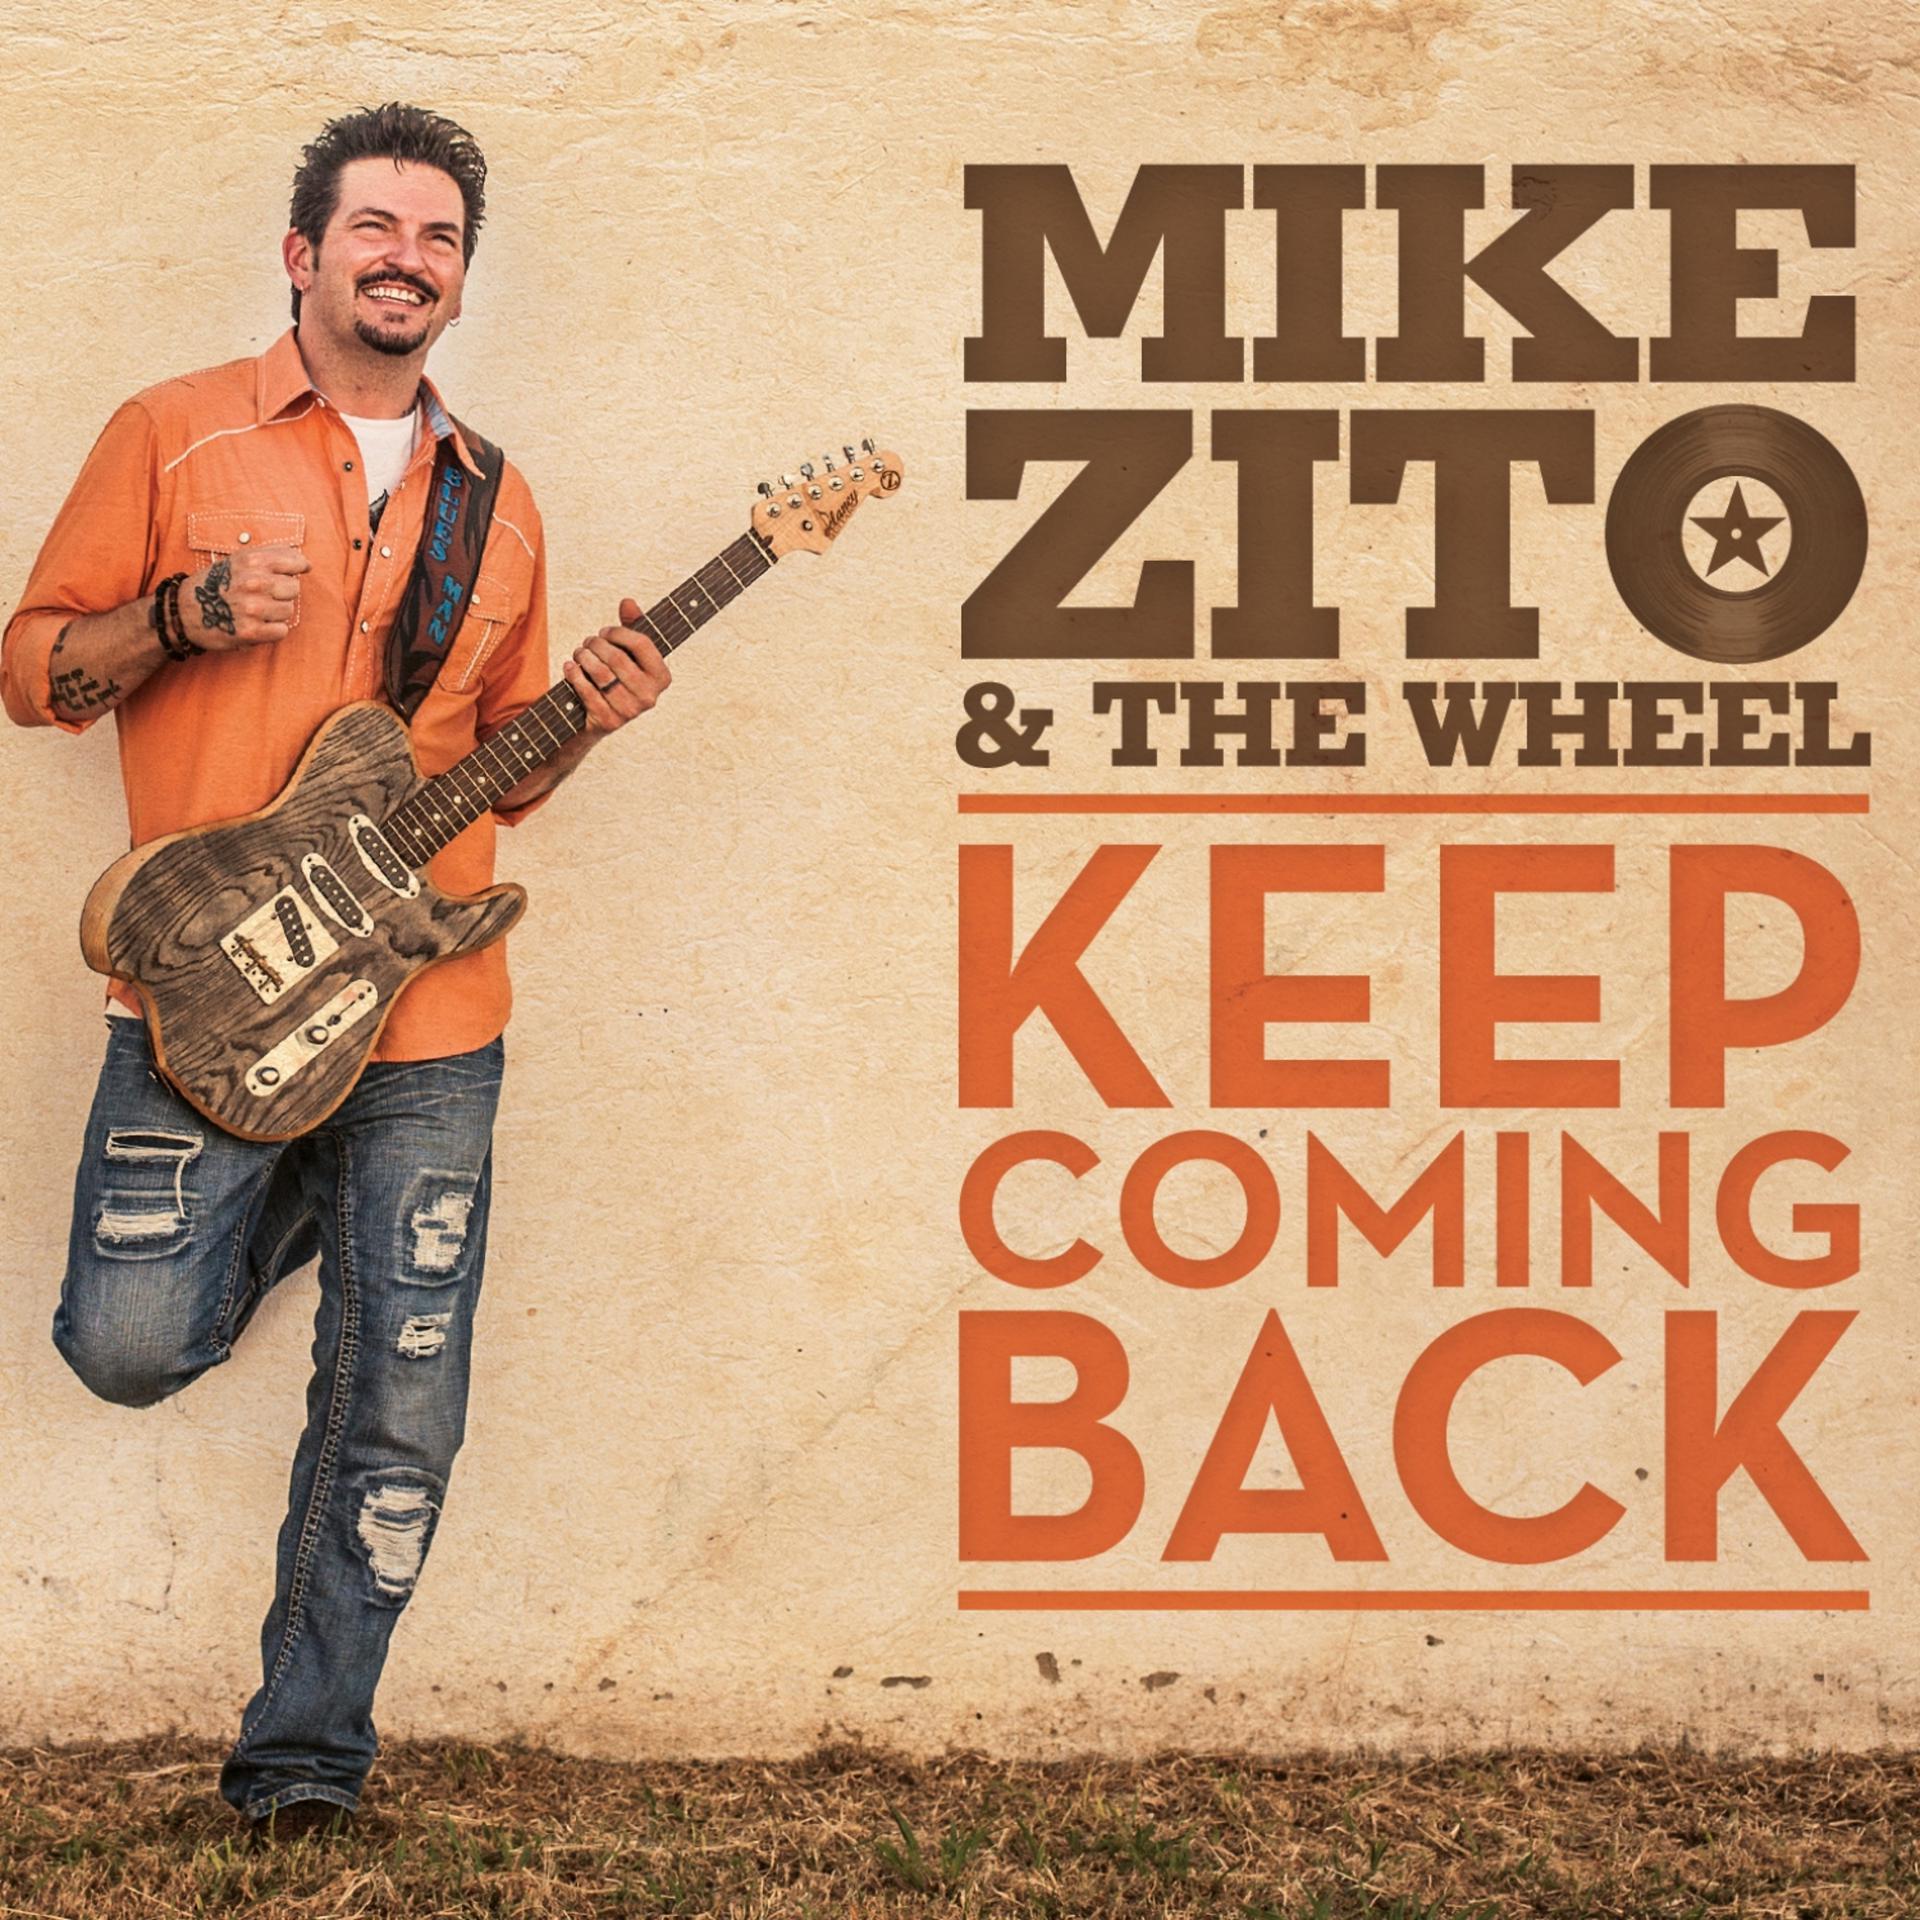 Keep the come up. Mike Zito. Mike Zito & the Wheel keep coming back  2015. Фото Mike Zito. Mike Zito Википедия.